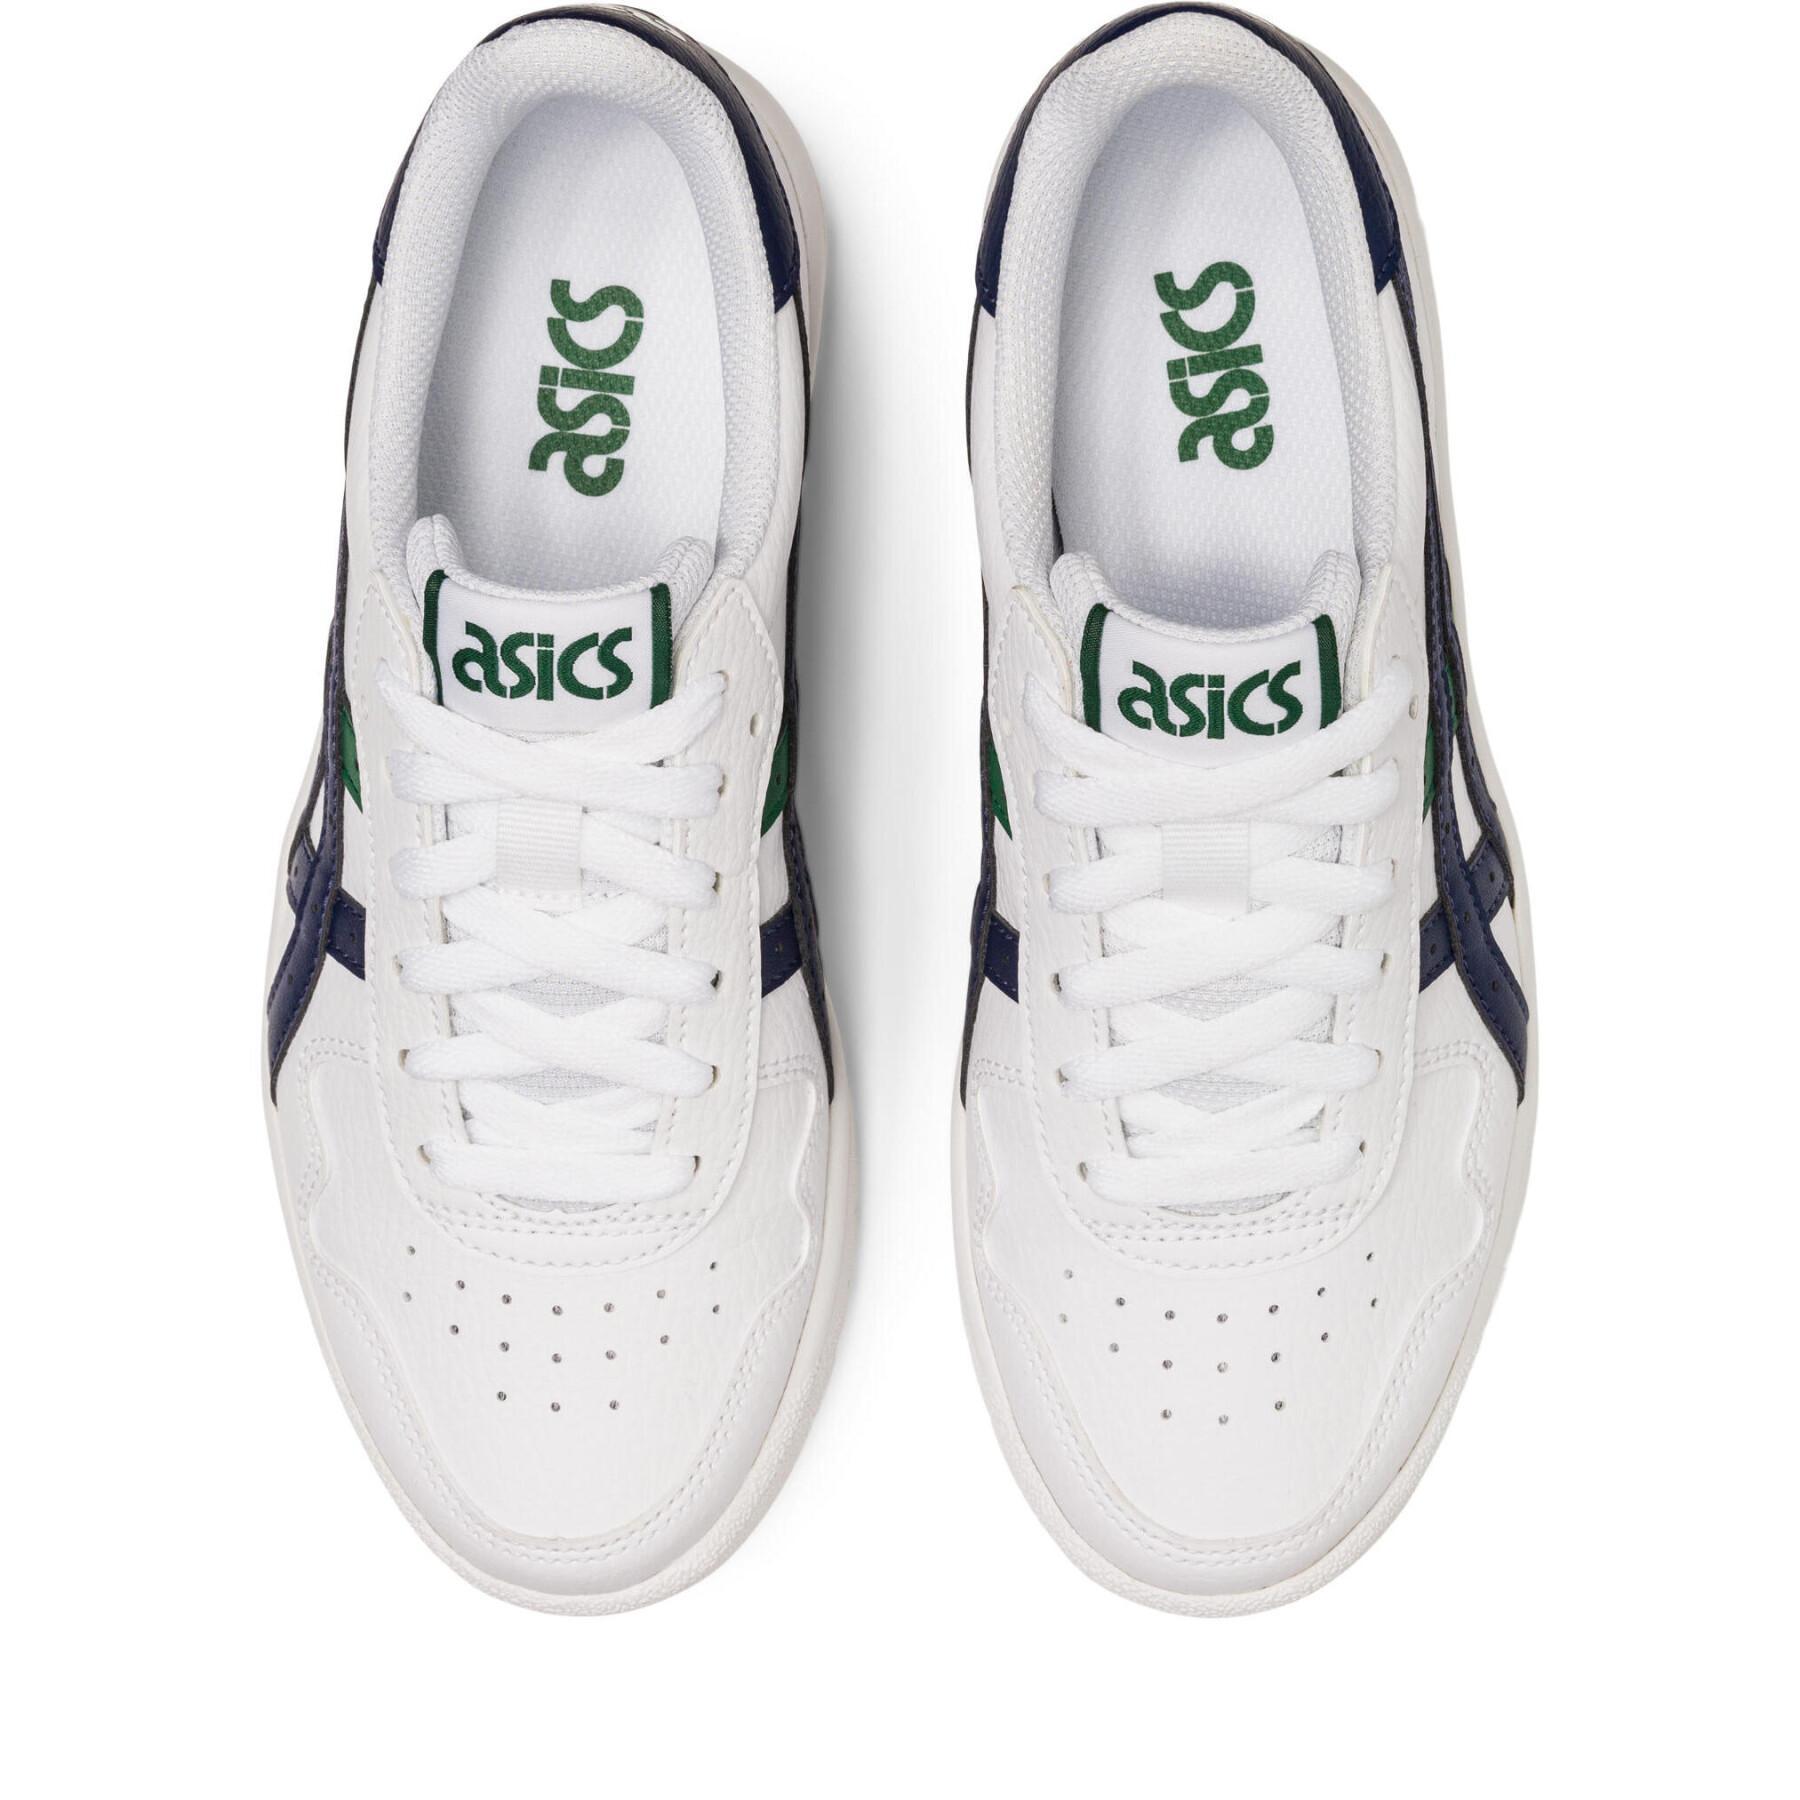 Sneakers Kind Asics Japan S GS